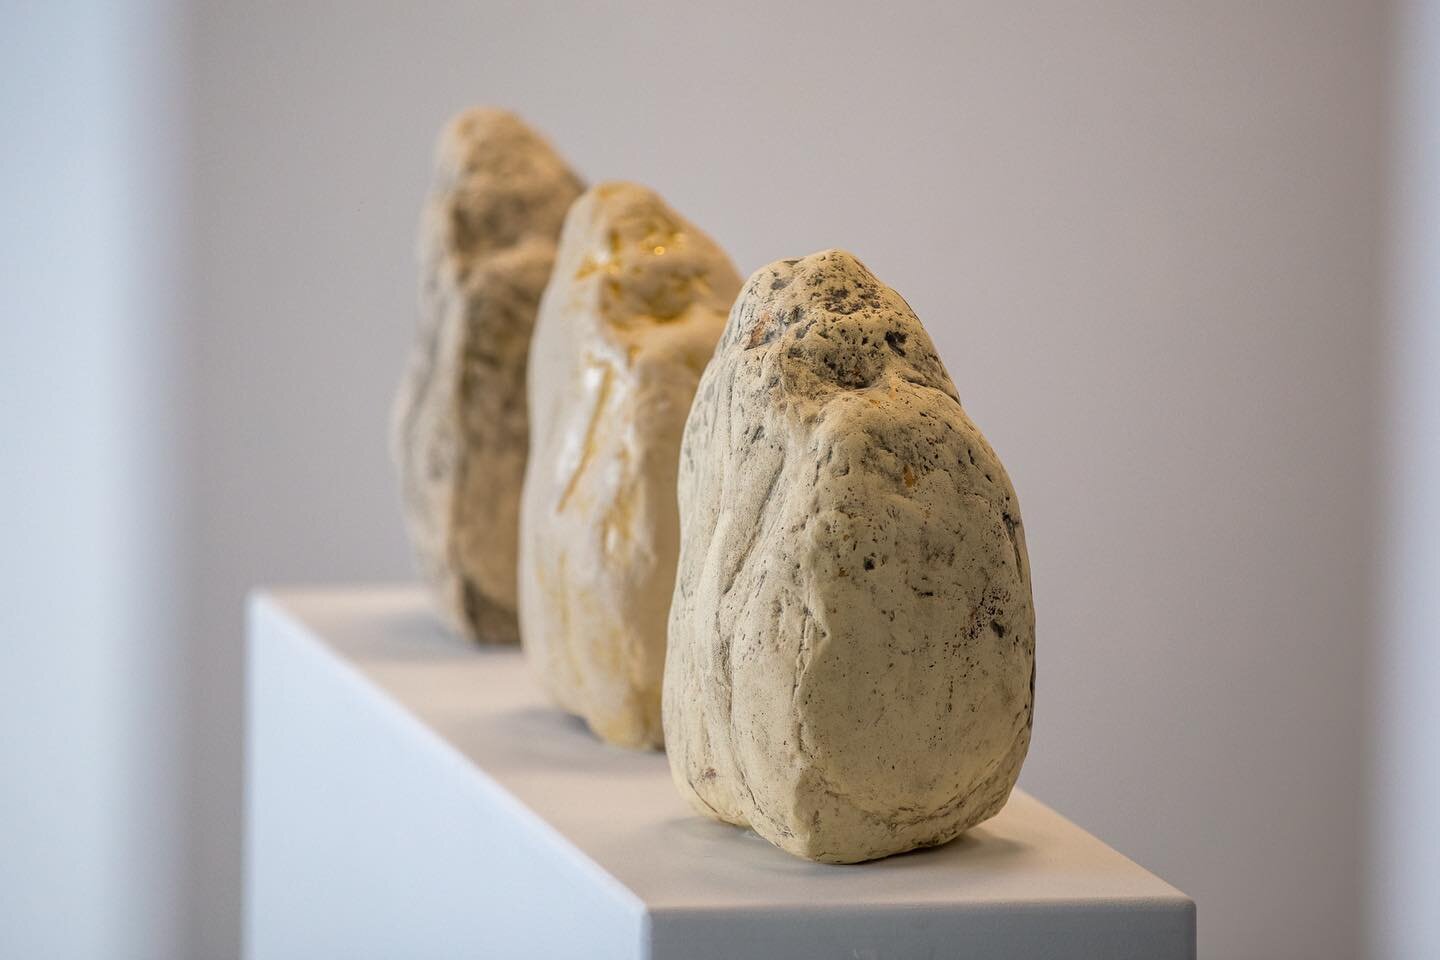 This is Temporary 

Last day to view as part of group exhibition Stoned @brokergalleries Frankton. 

Shannon Courtenay creates ceramic works that
are at first glance, utterly realistic representations
of natural stones and rocks. Through selecting
st